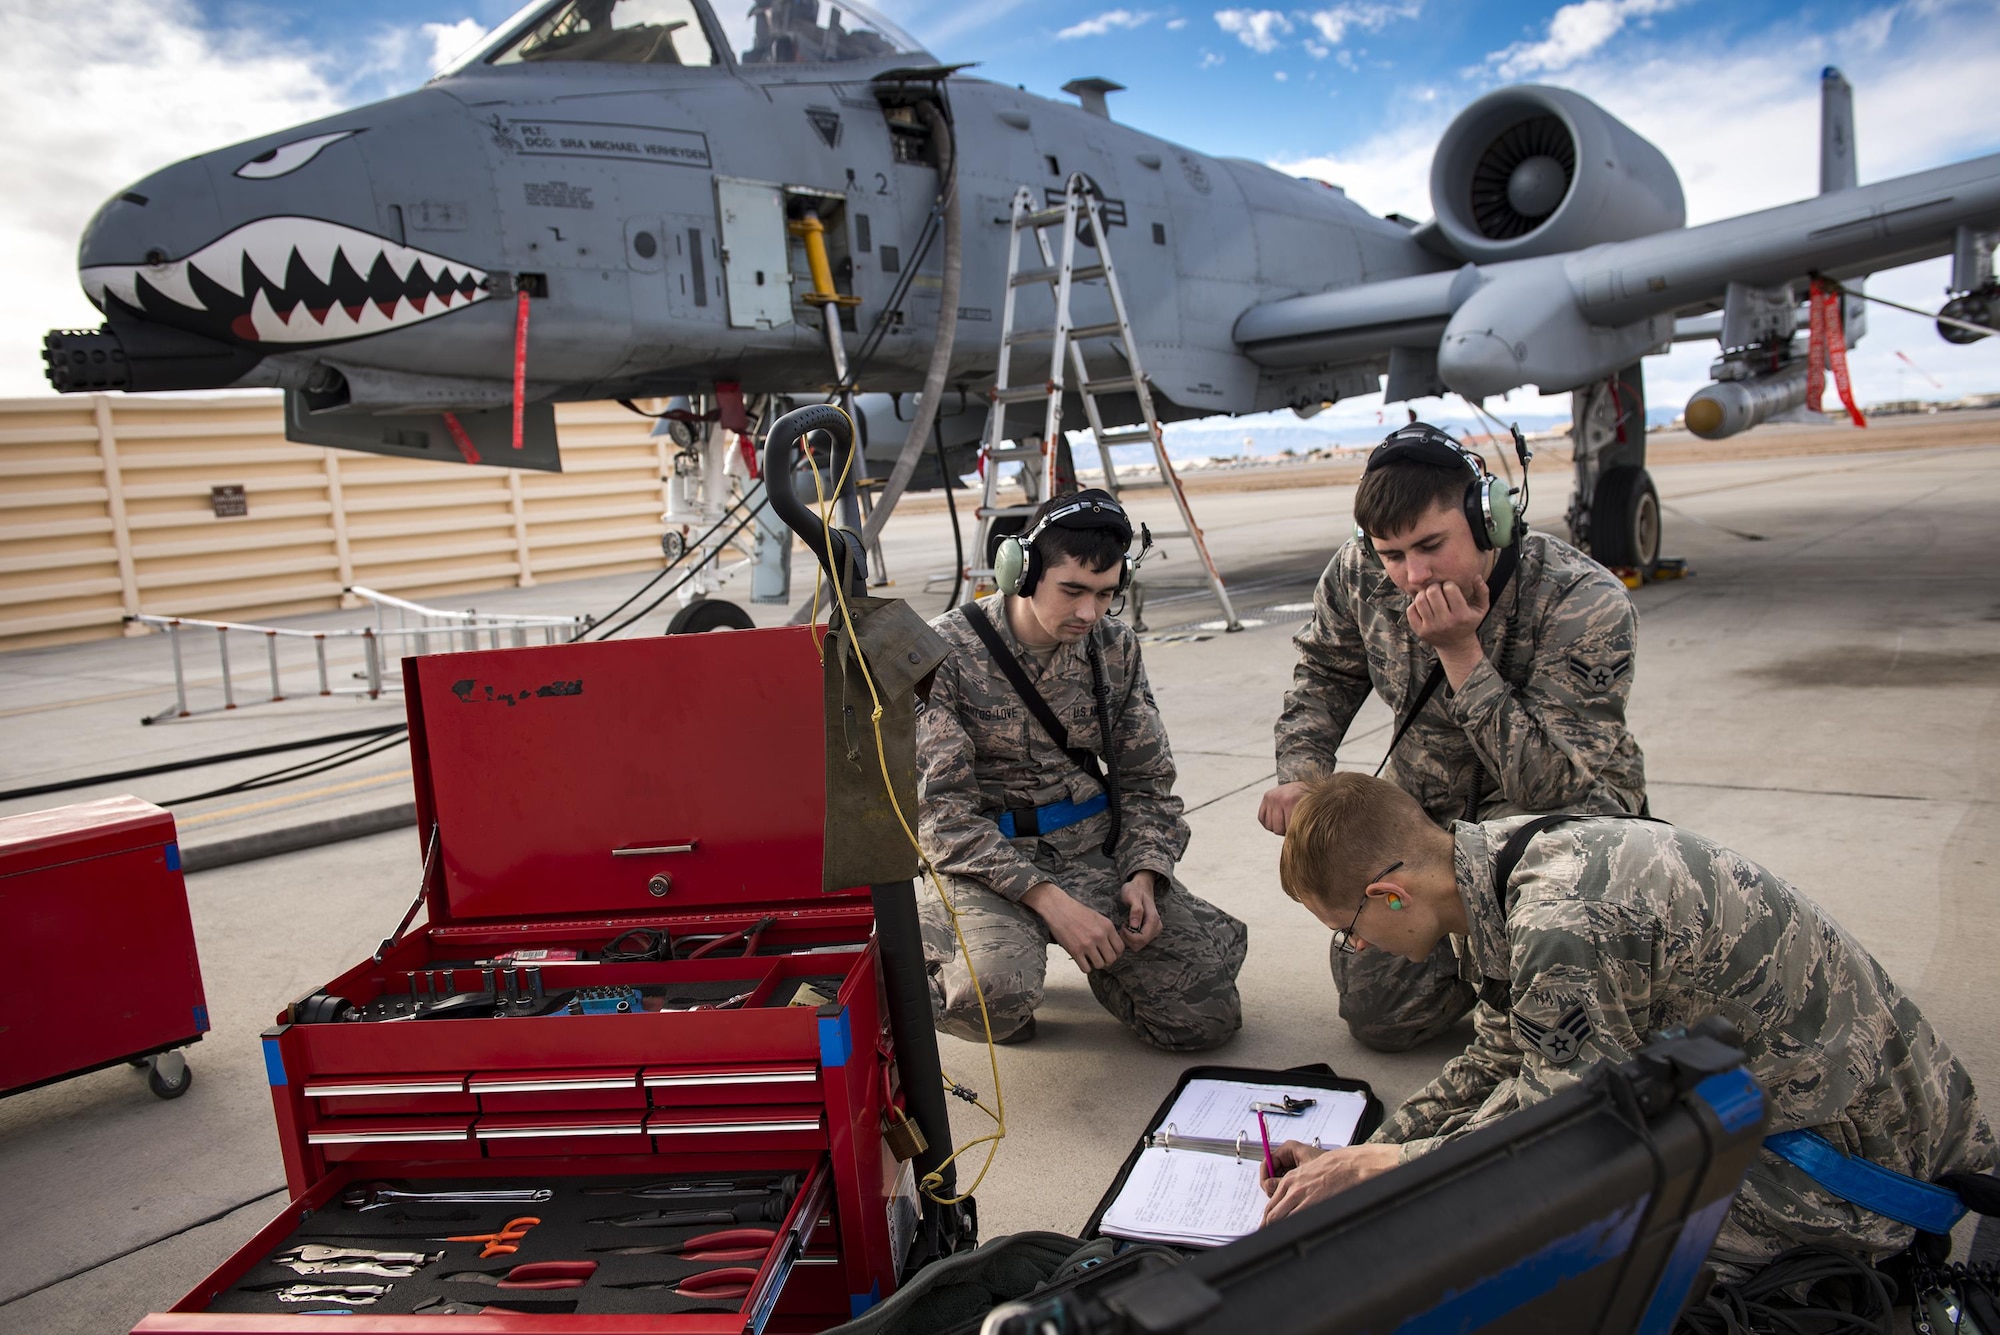 Airmen from the 74th Aircraft Maintenance Unit document maintenance they completed on an A-10C Thunderbolt II during Green Flag-West 17-03, Jan. 23, 2017, at Nellis Air Force Base, Nev. GFW is an air-land integration combat training exercise, which hosted 12 A-10s from Moody Air Force Base, Ga. Accompanying the aircraft were 130 maintenance personnel who worked around the clock to launch 18 sorties per day. (U.S. Air Force photo by Staff Sgt. Ryan Callaghan)